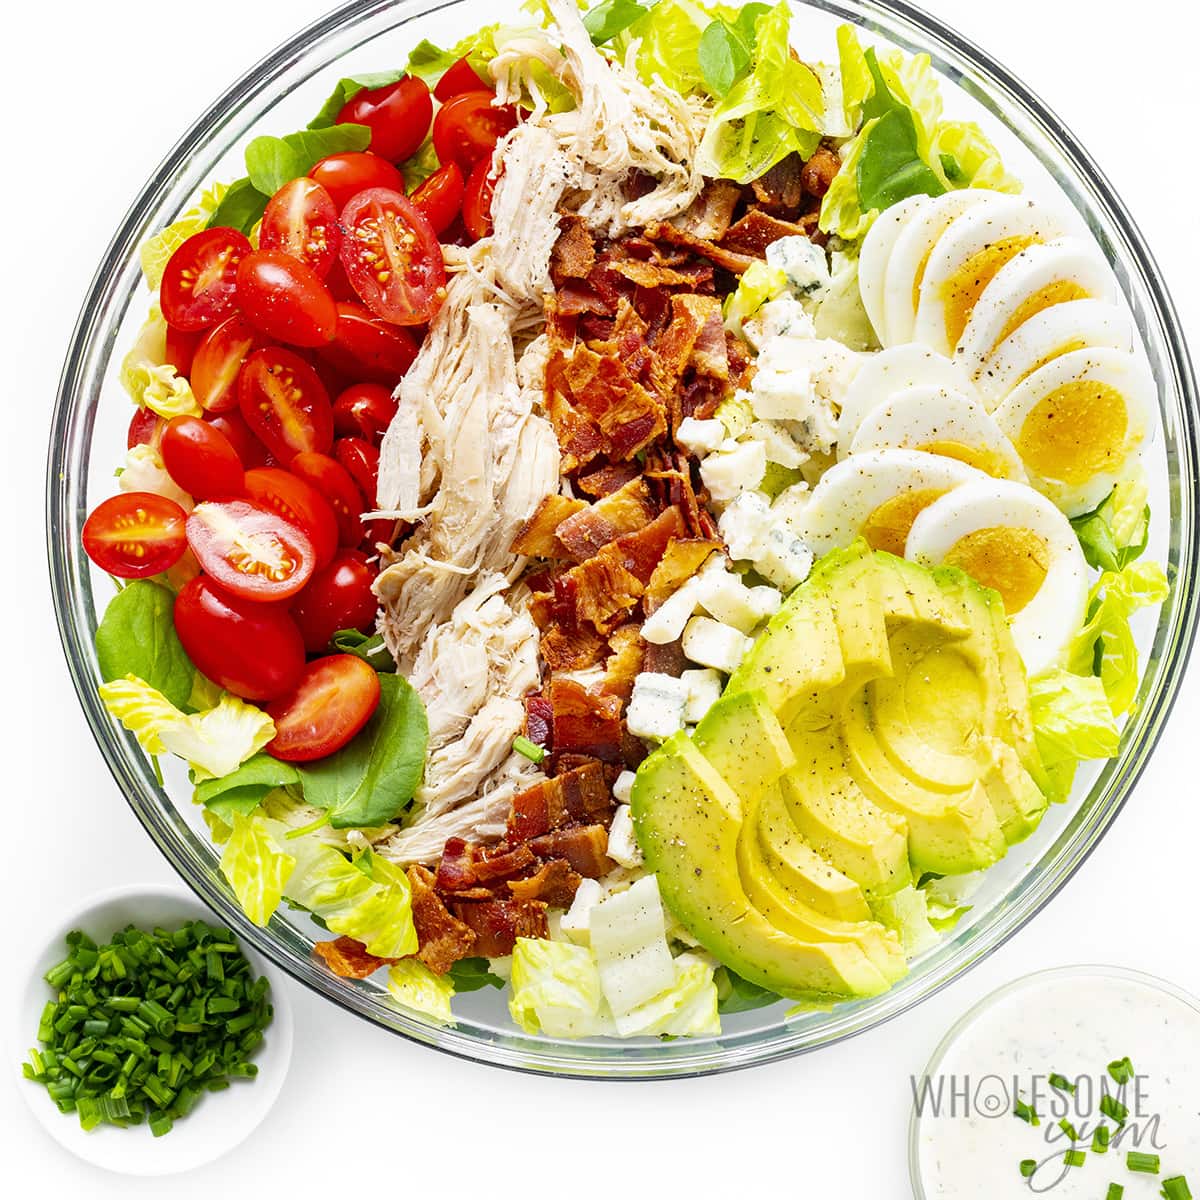 Cobb Salad Recipe (Quick and Easy!) - Story Telling Co